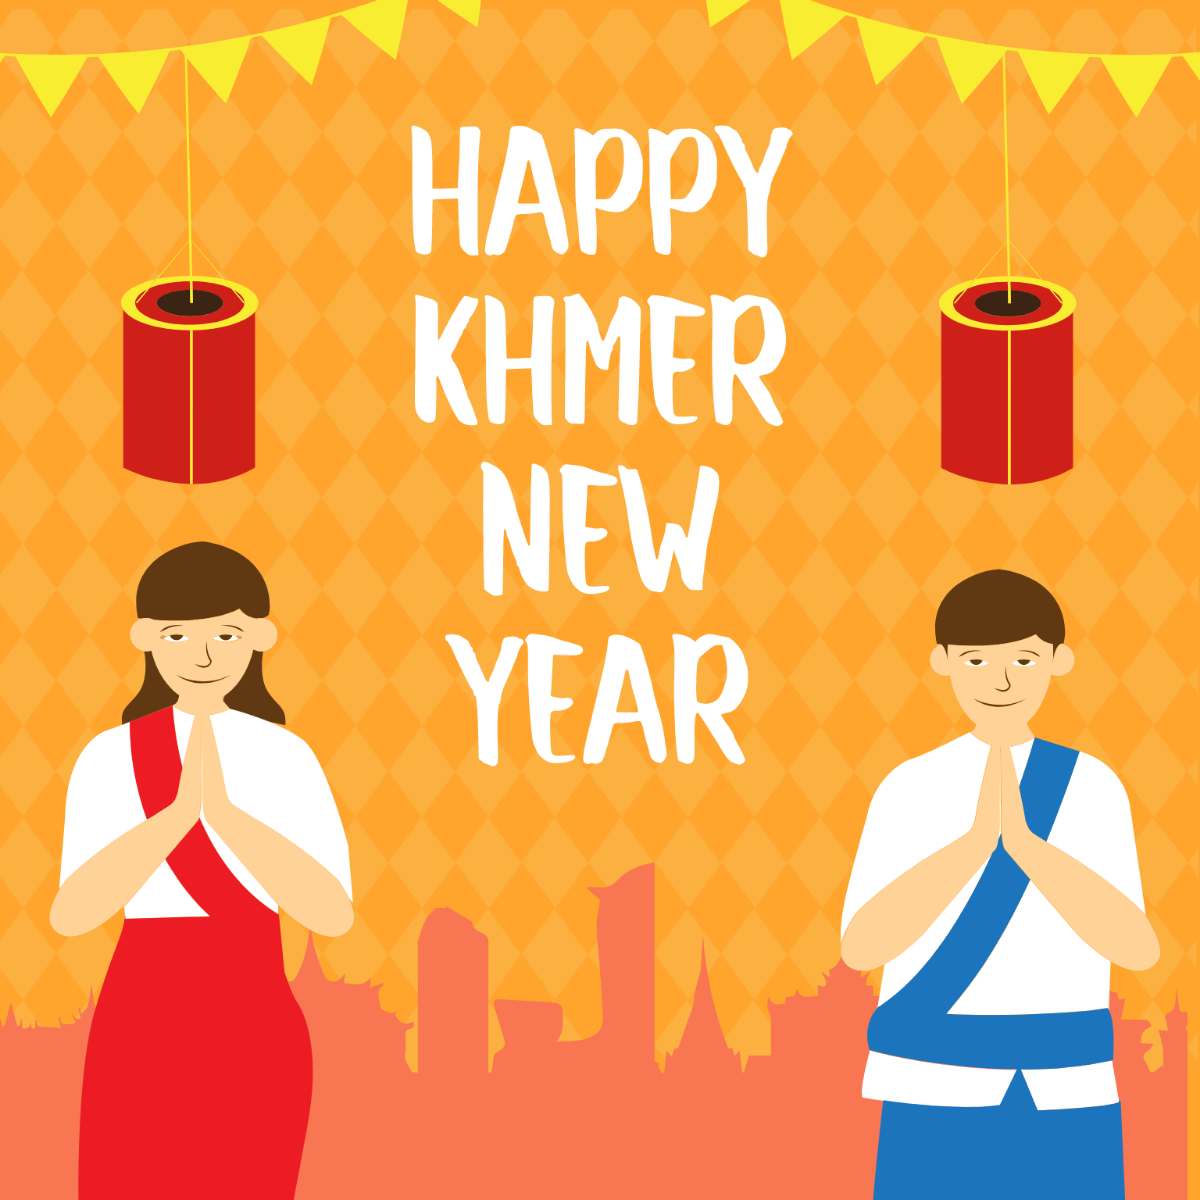 Free Khmer New Year Illustration Template